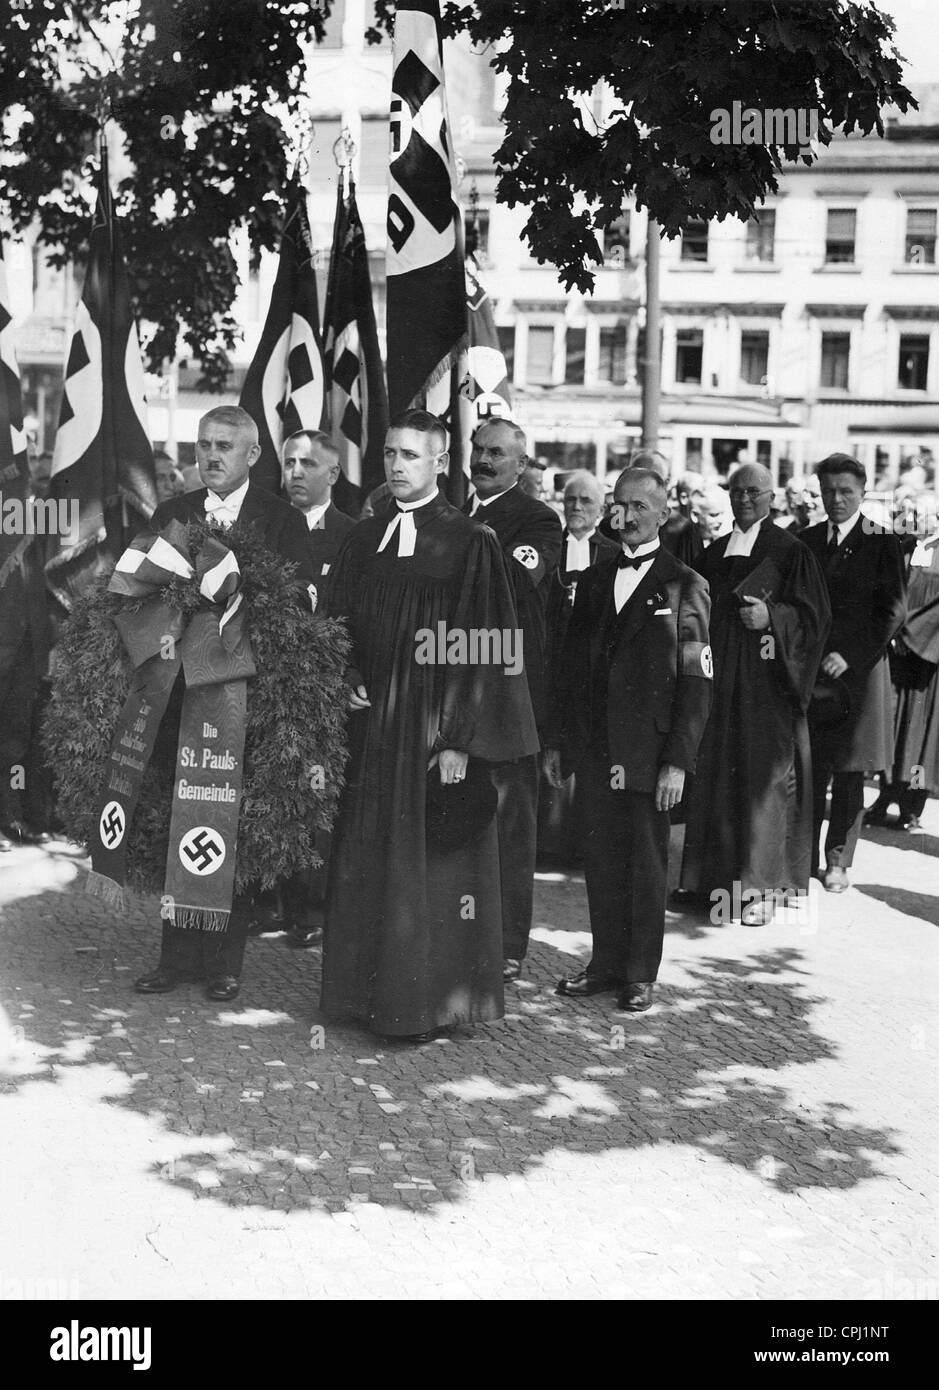 Ceremony of honor for the fallen in front of the St. Paul's Church in Berlin, 1935 Stock Photo